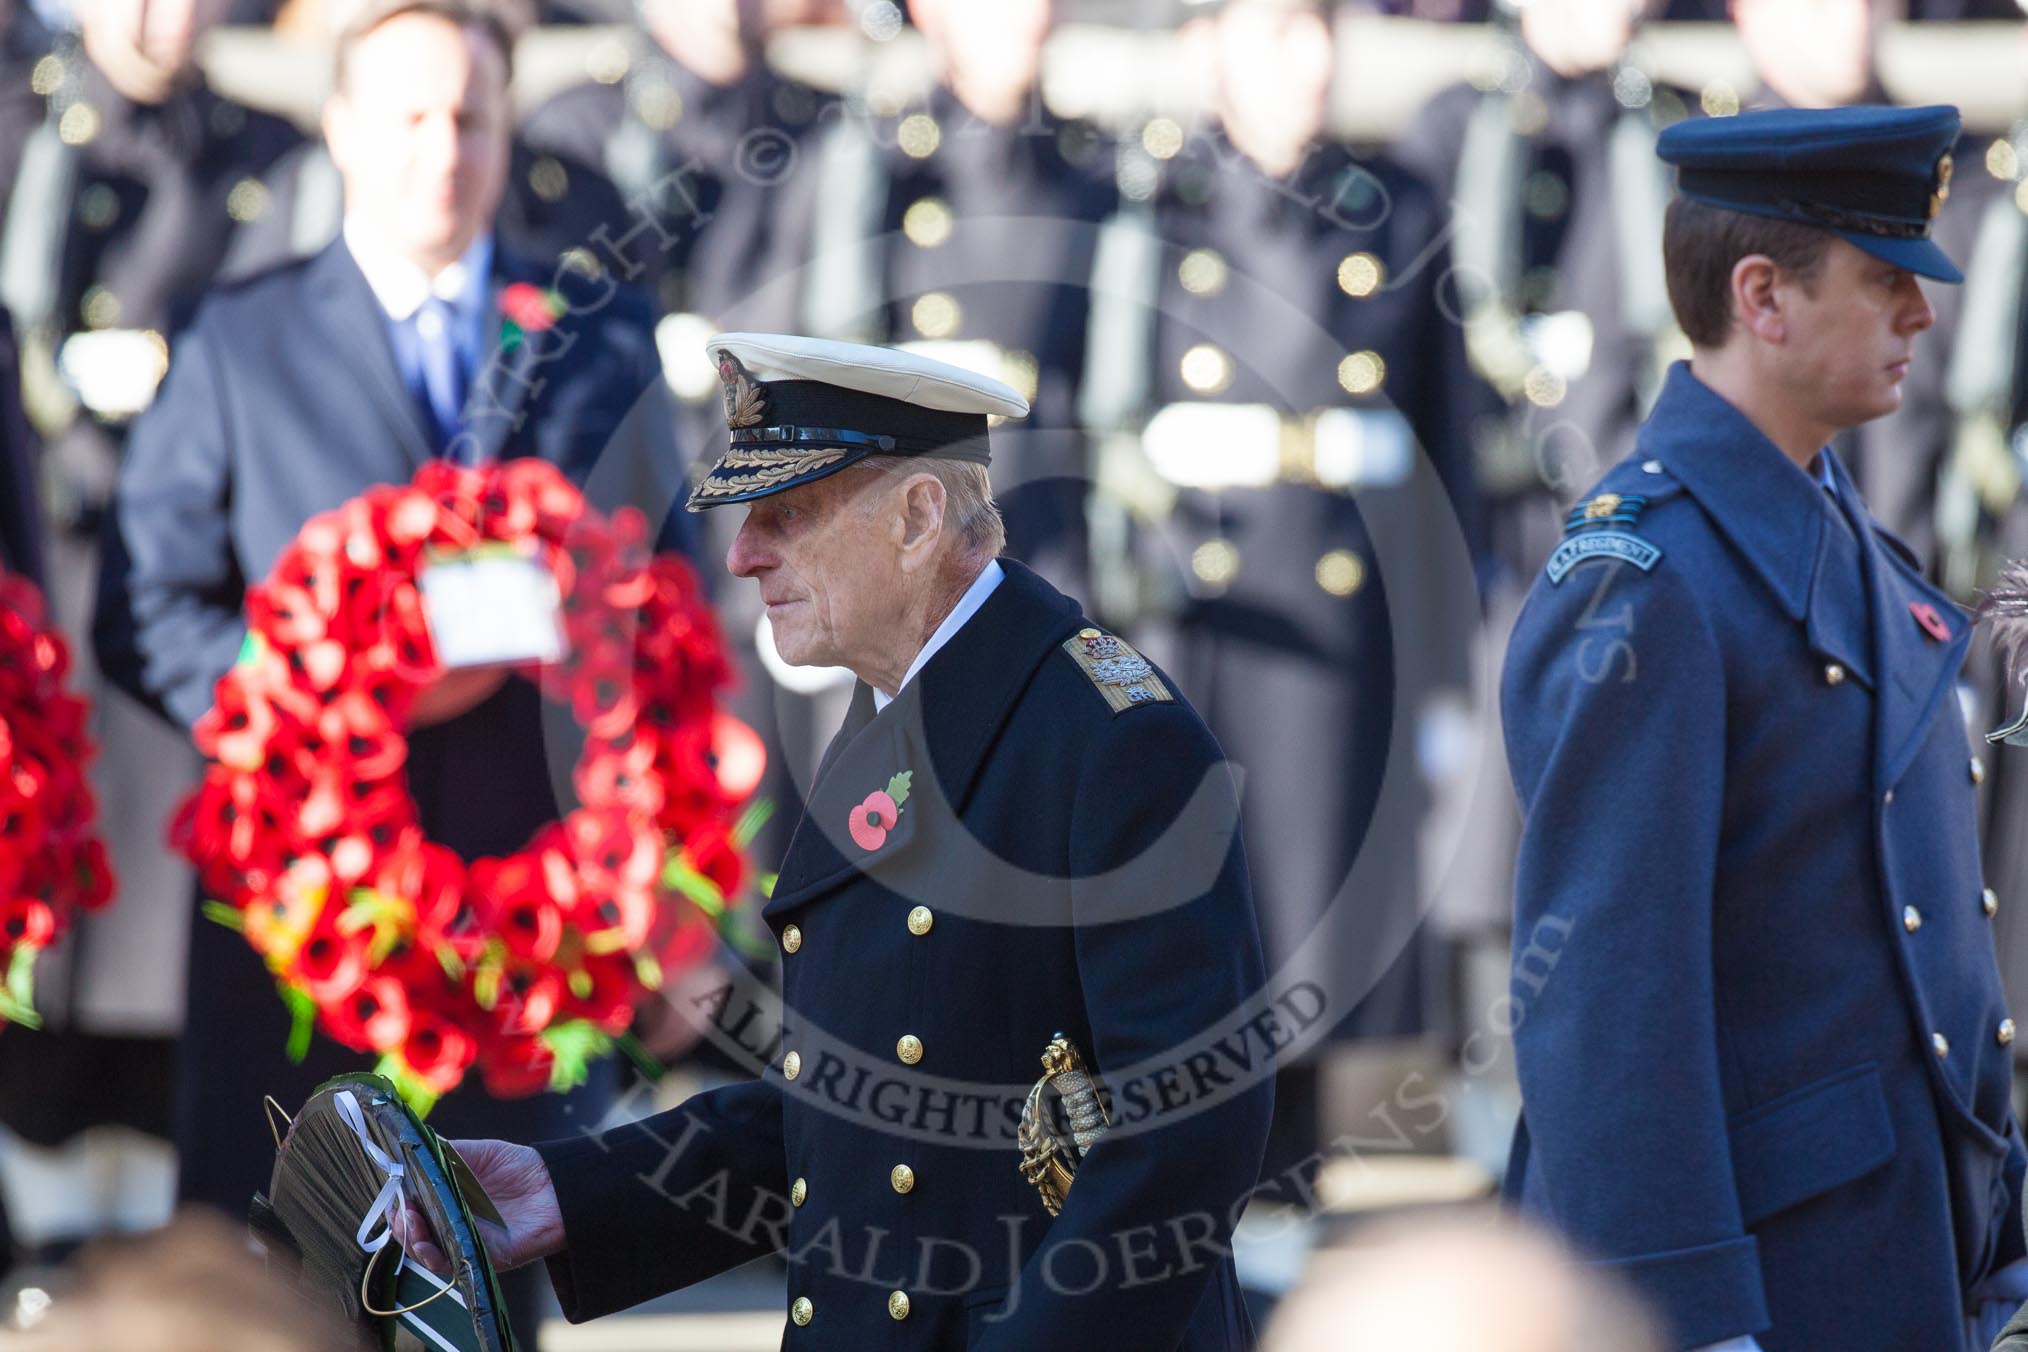 HRH The Duke of Edinburgh, about to lay the wreath that has just been given to him by the Equerry, Squadron Leader Dale White, RAF, on the right.